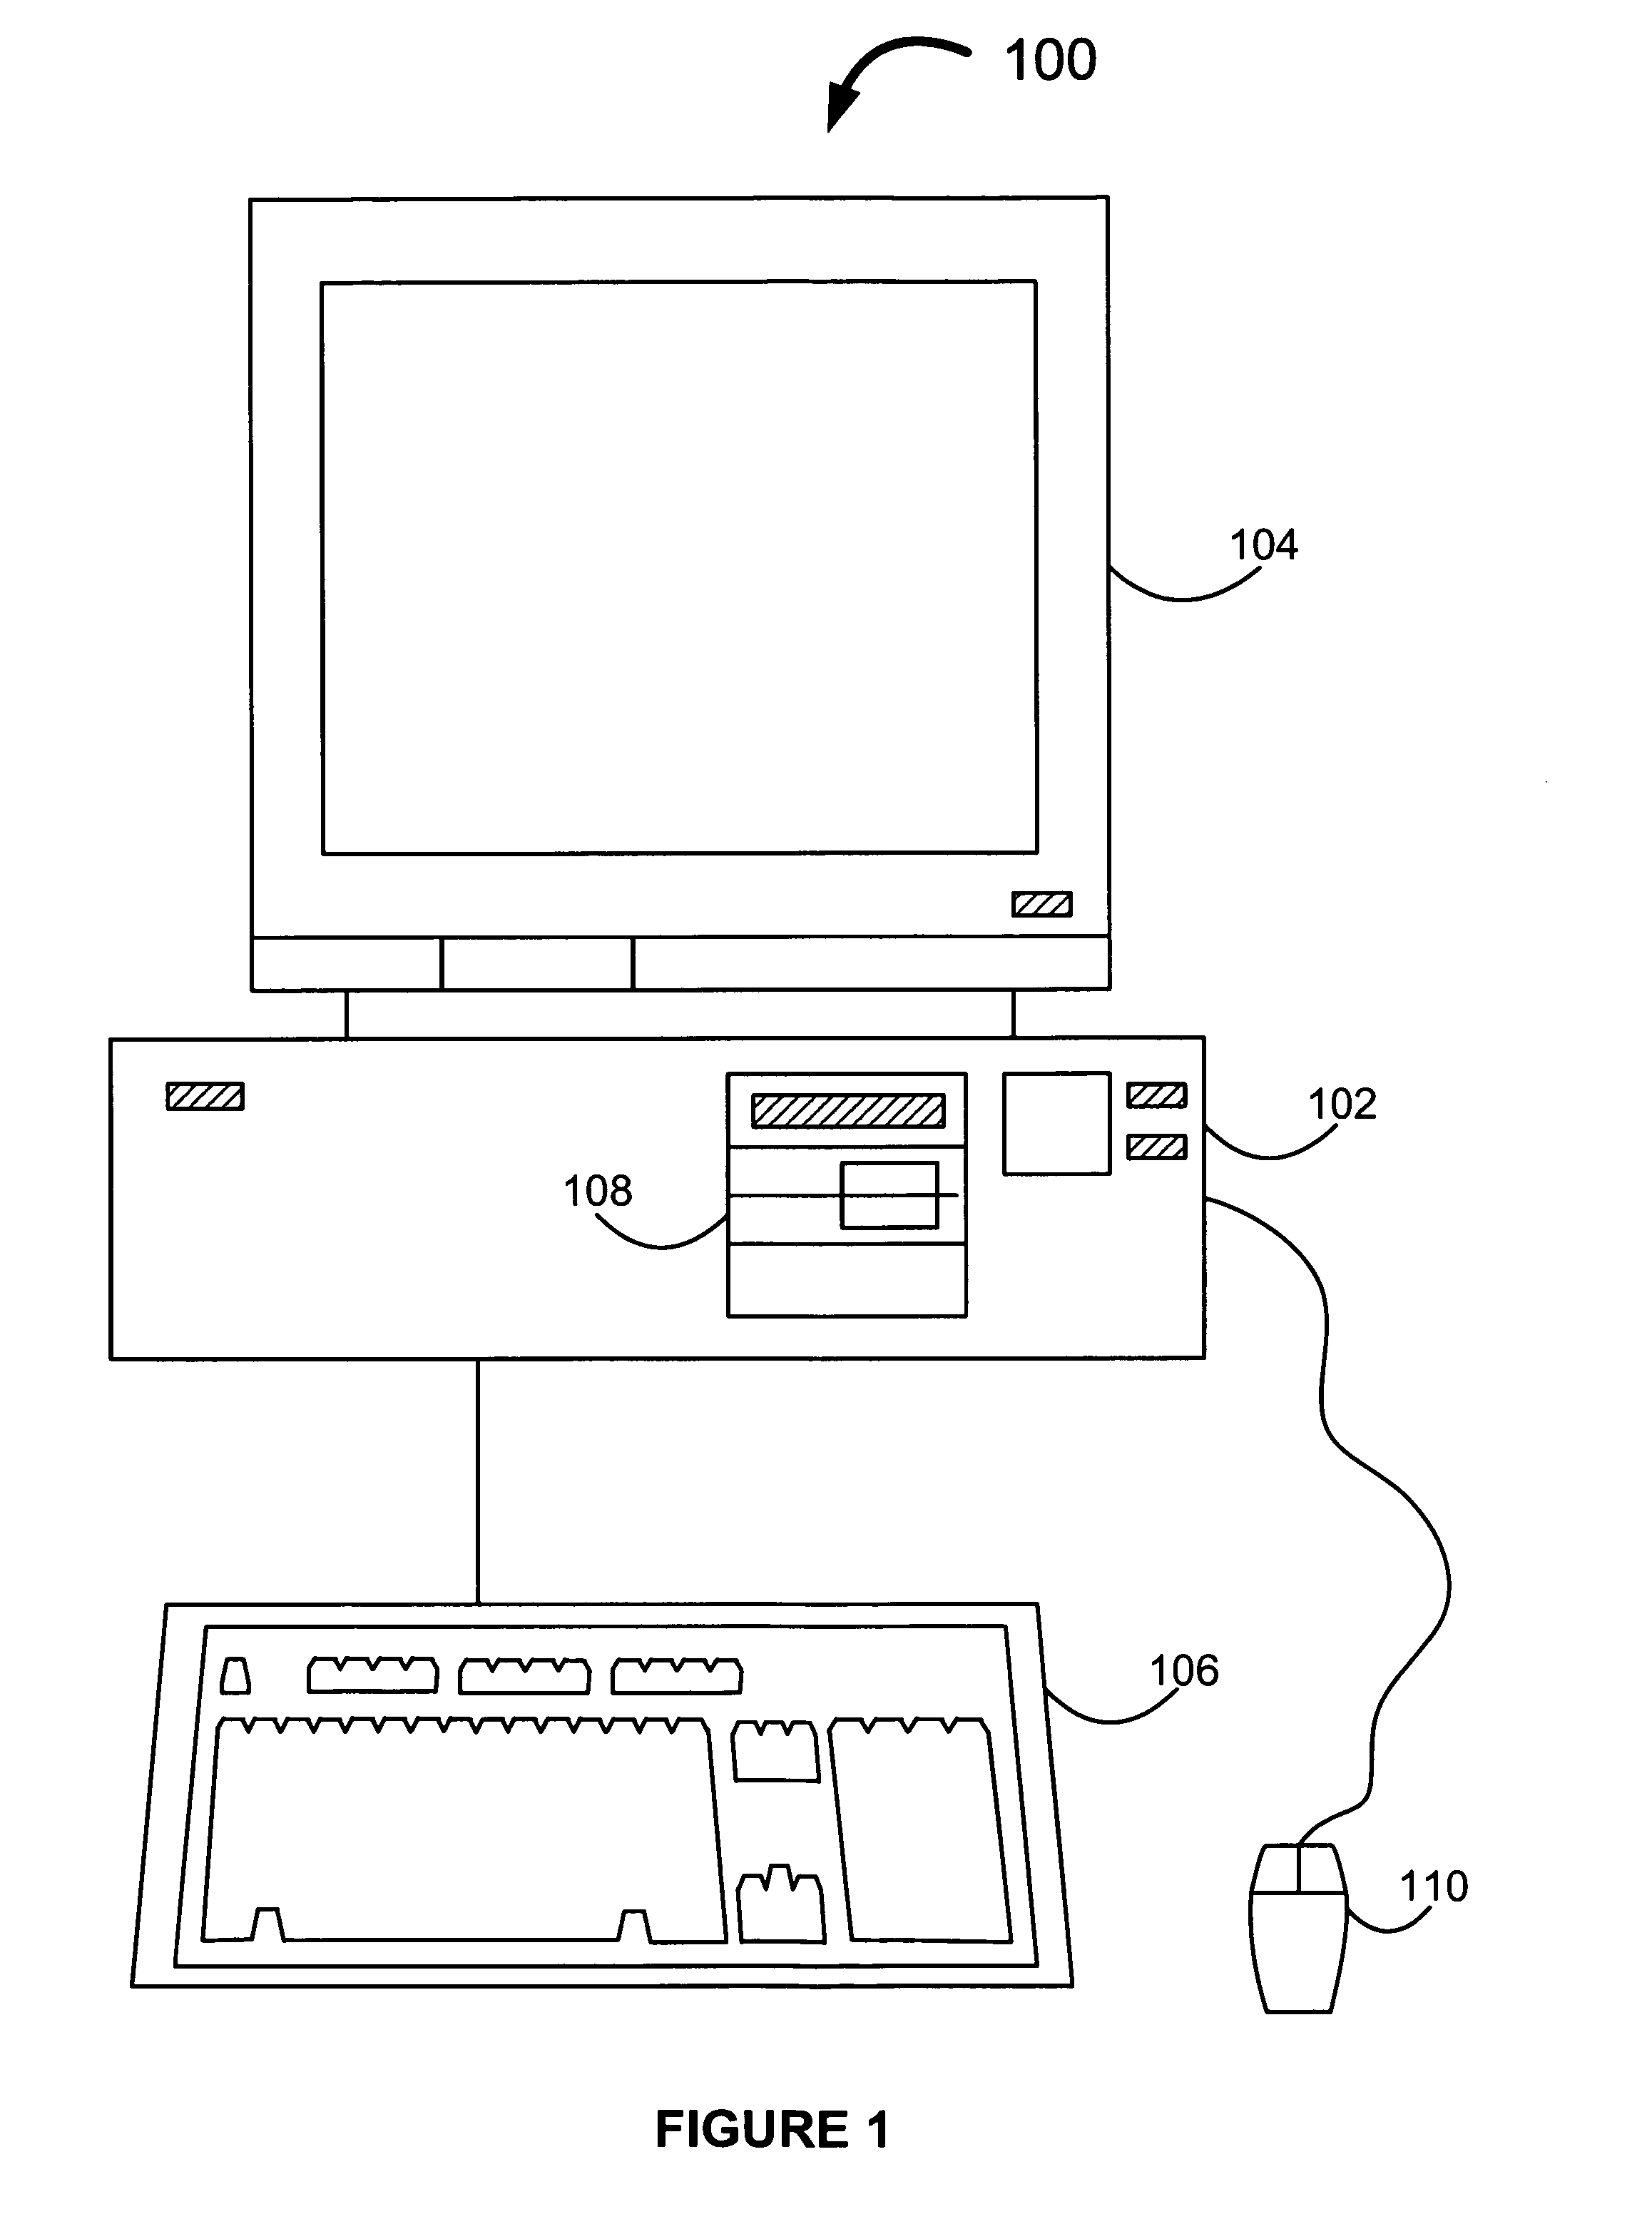 Method and system for layout versus schematic validation of integrated circuit designs